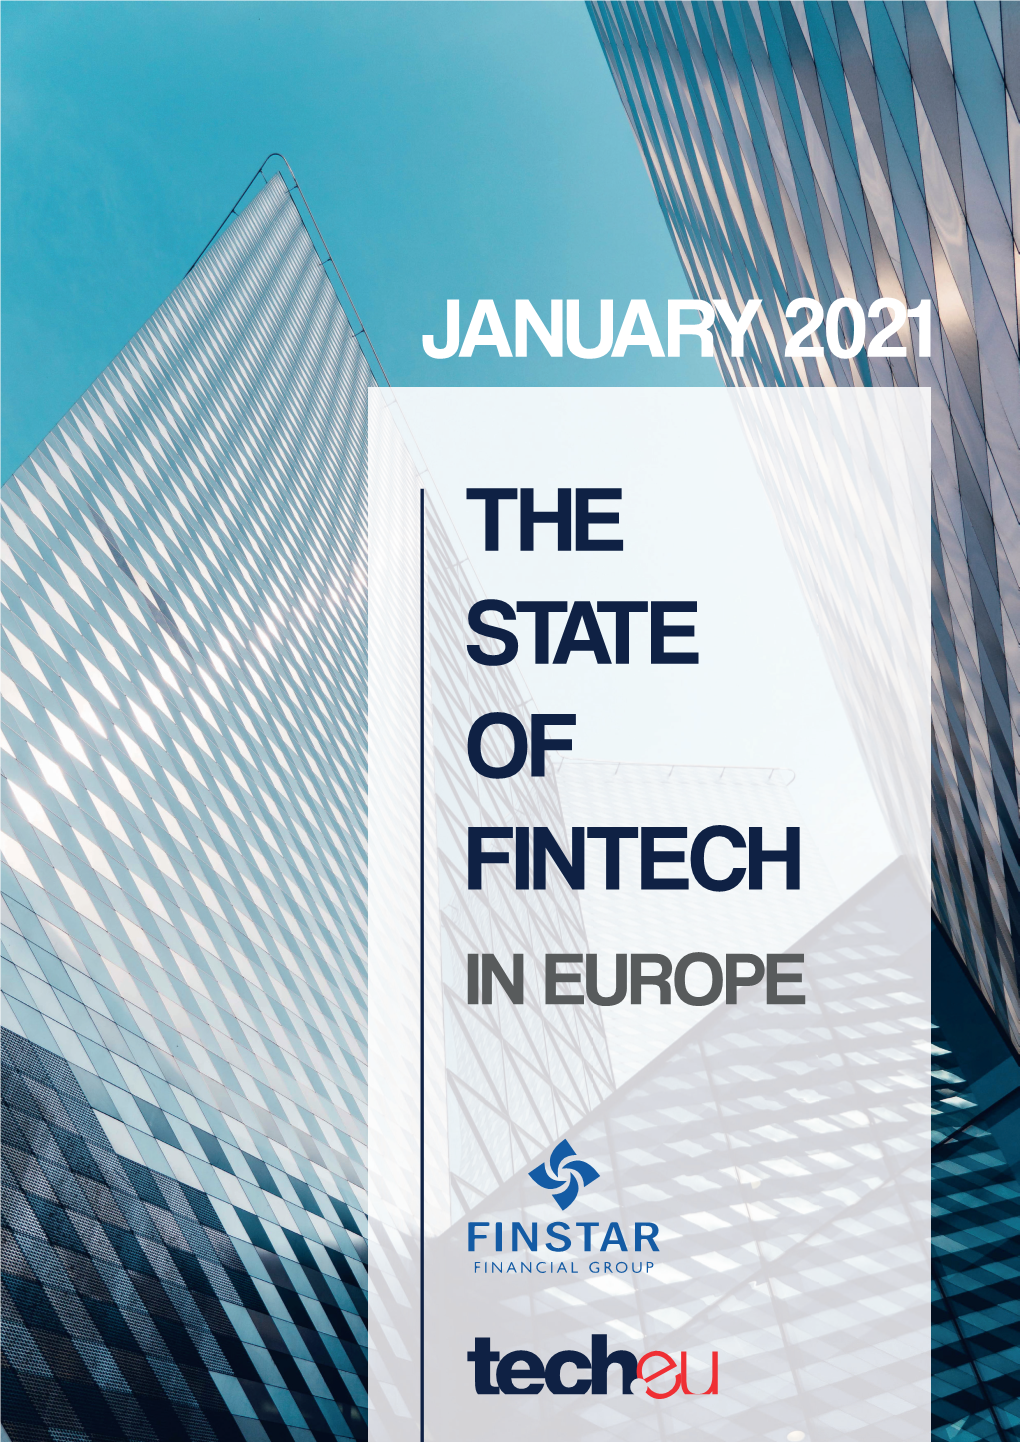 The State of Fintech in Europe 2021